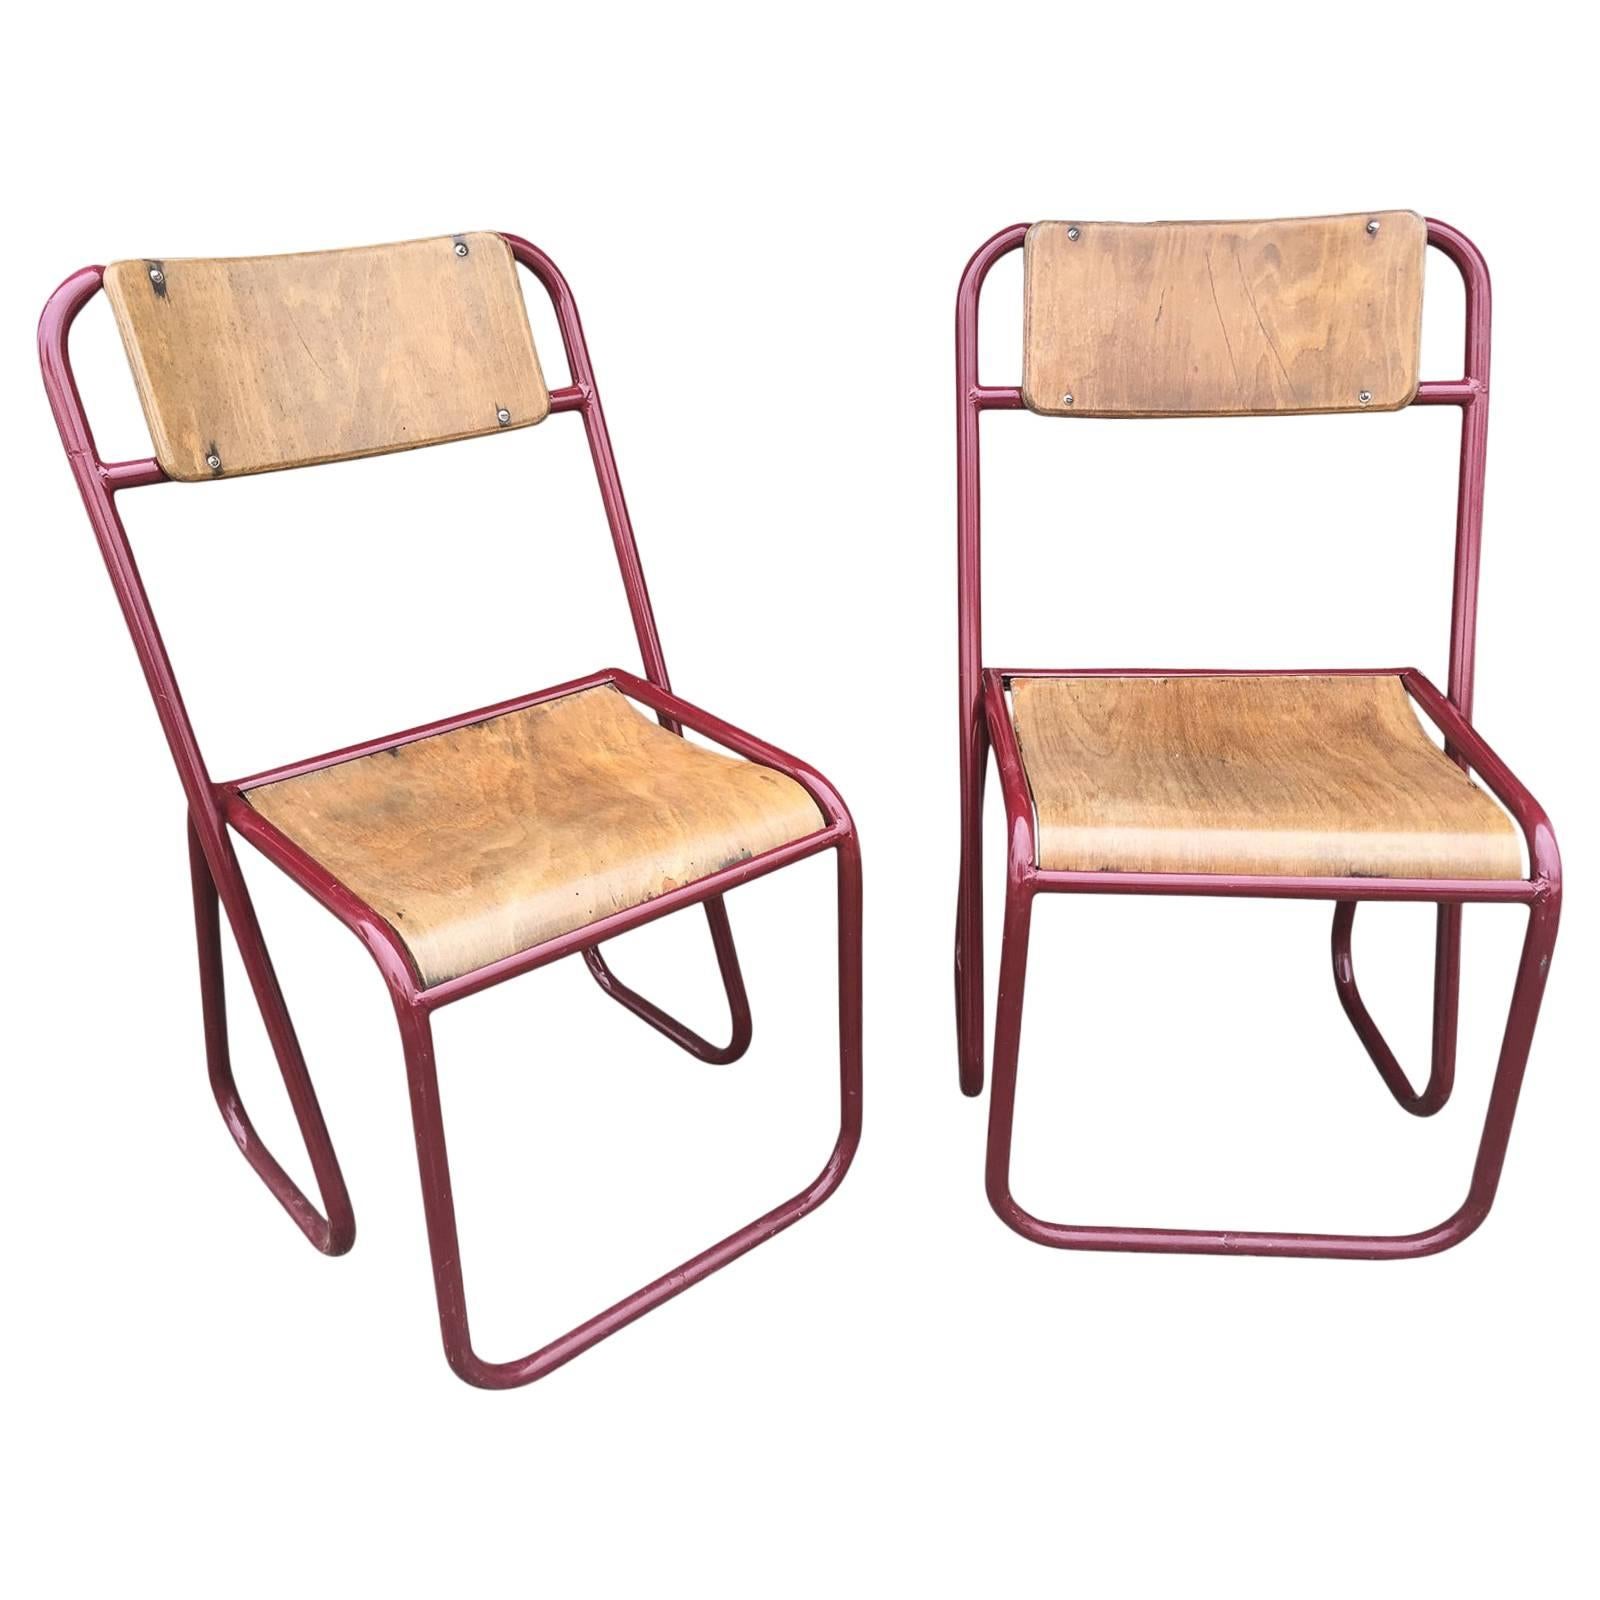 Rare Pair of French Chairs